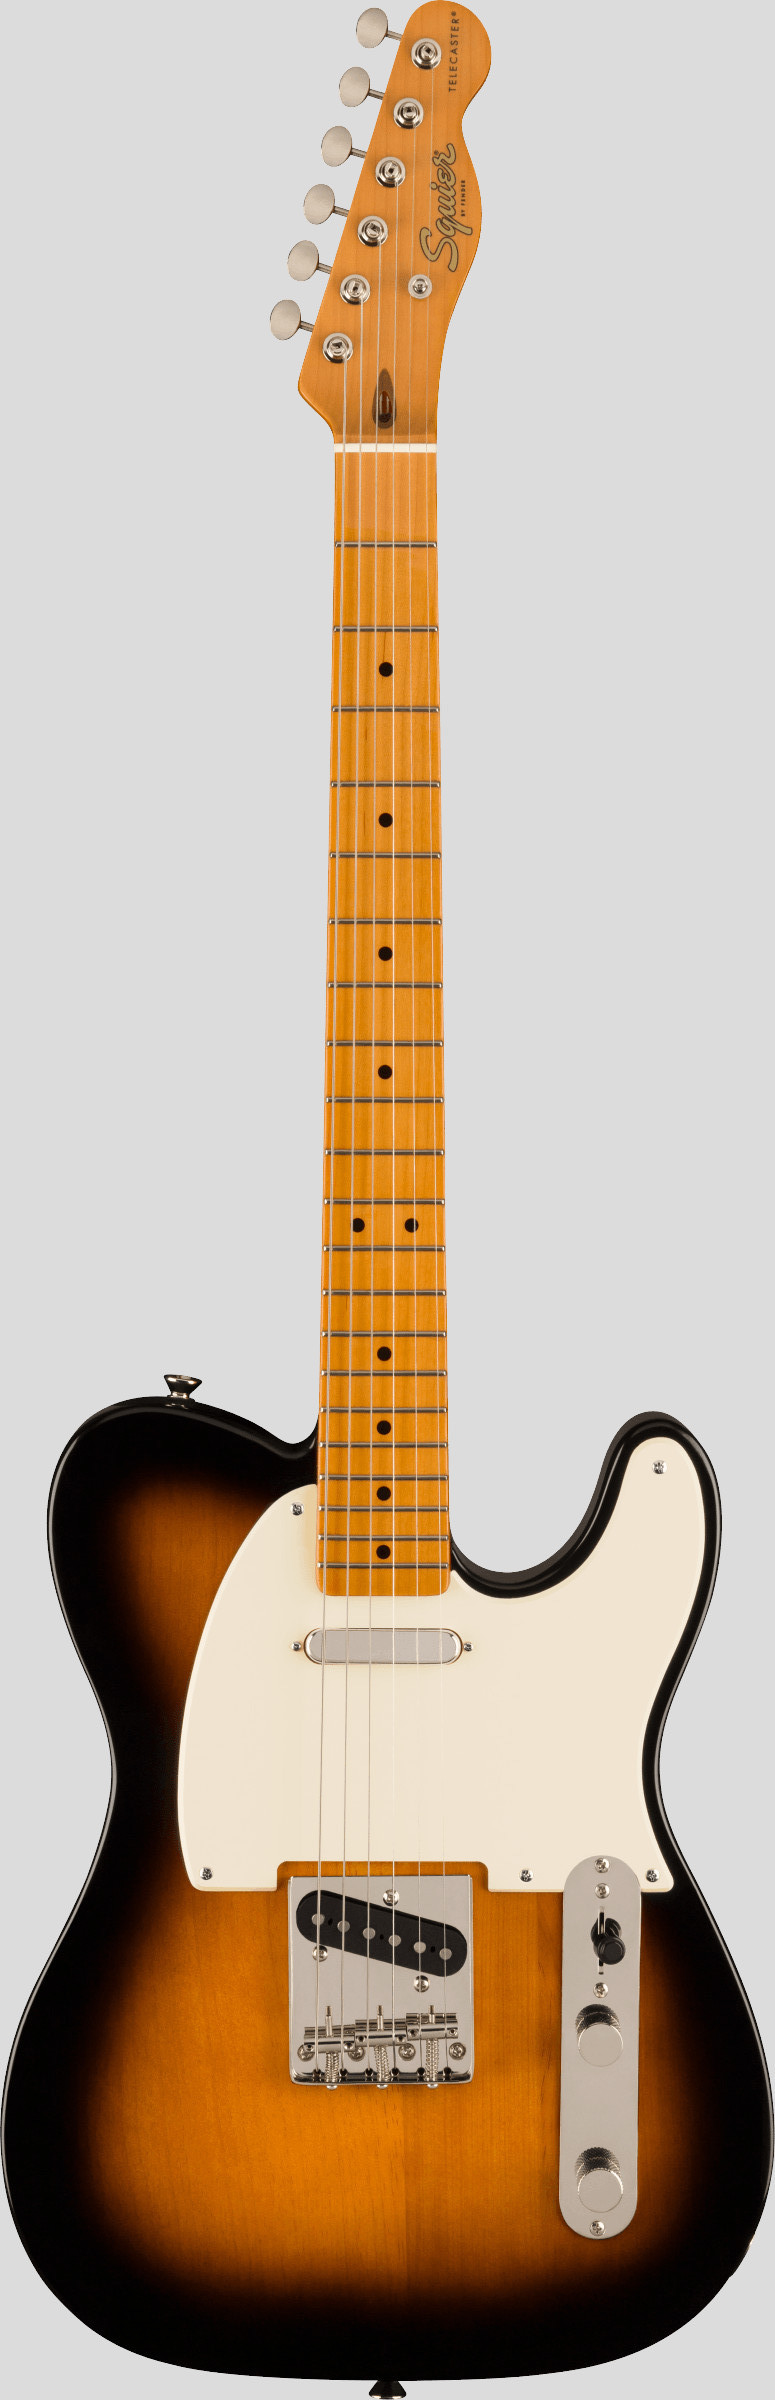 Squier by Fender Limited Edition Classic Vibe 50 Telecaster 2-Color Sunburst 1